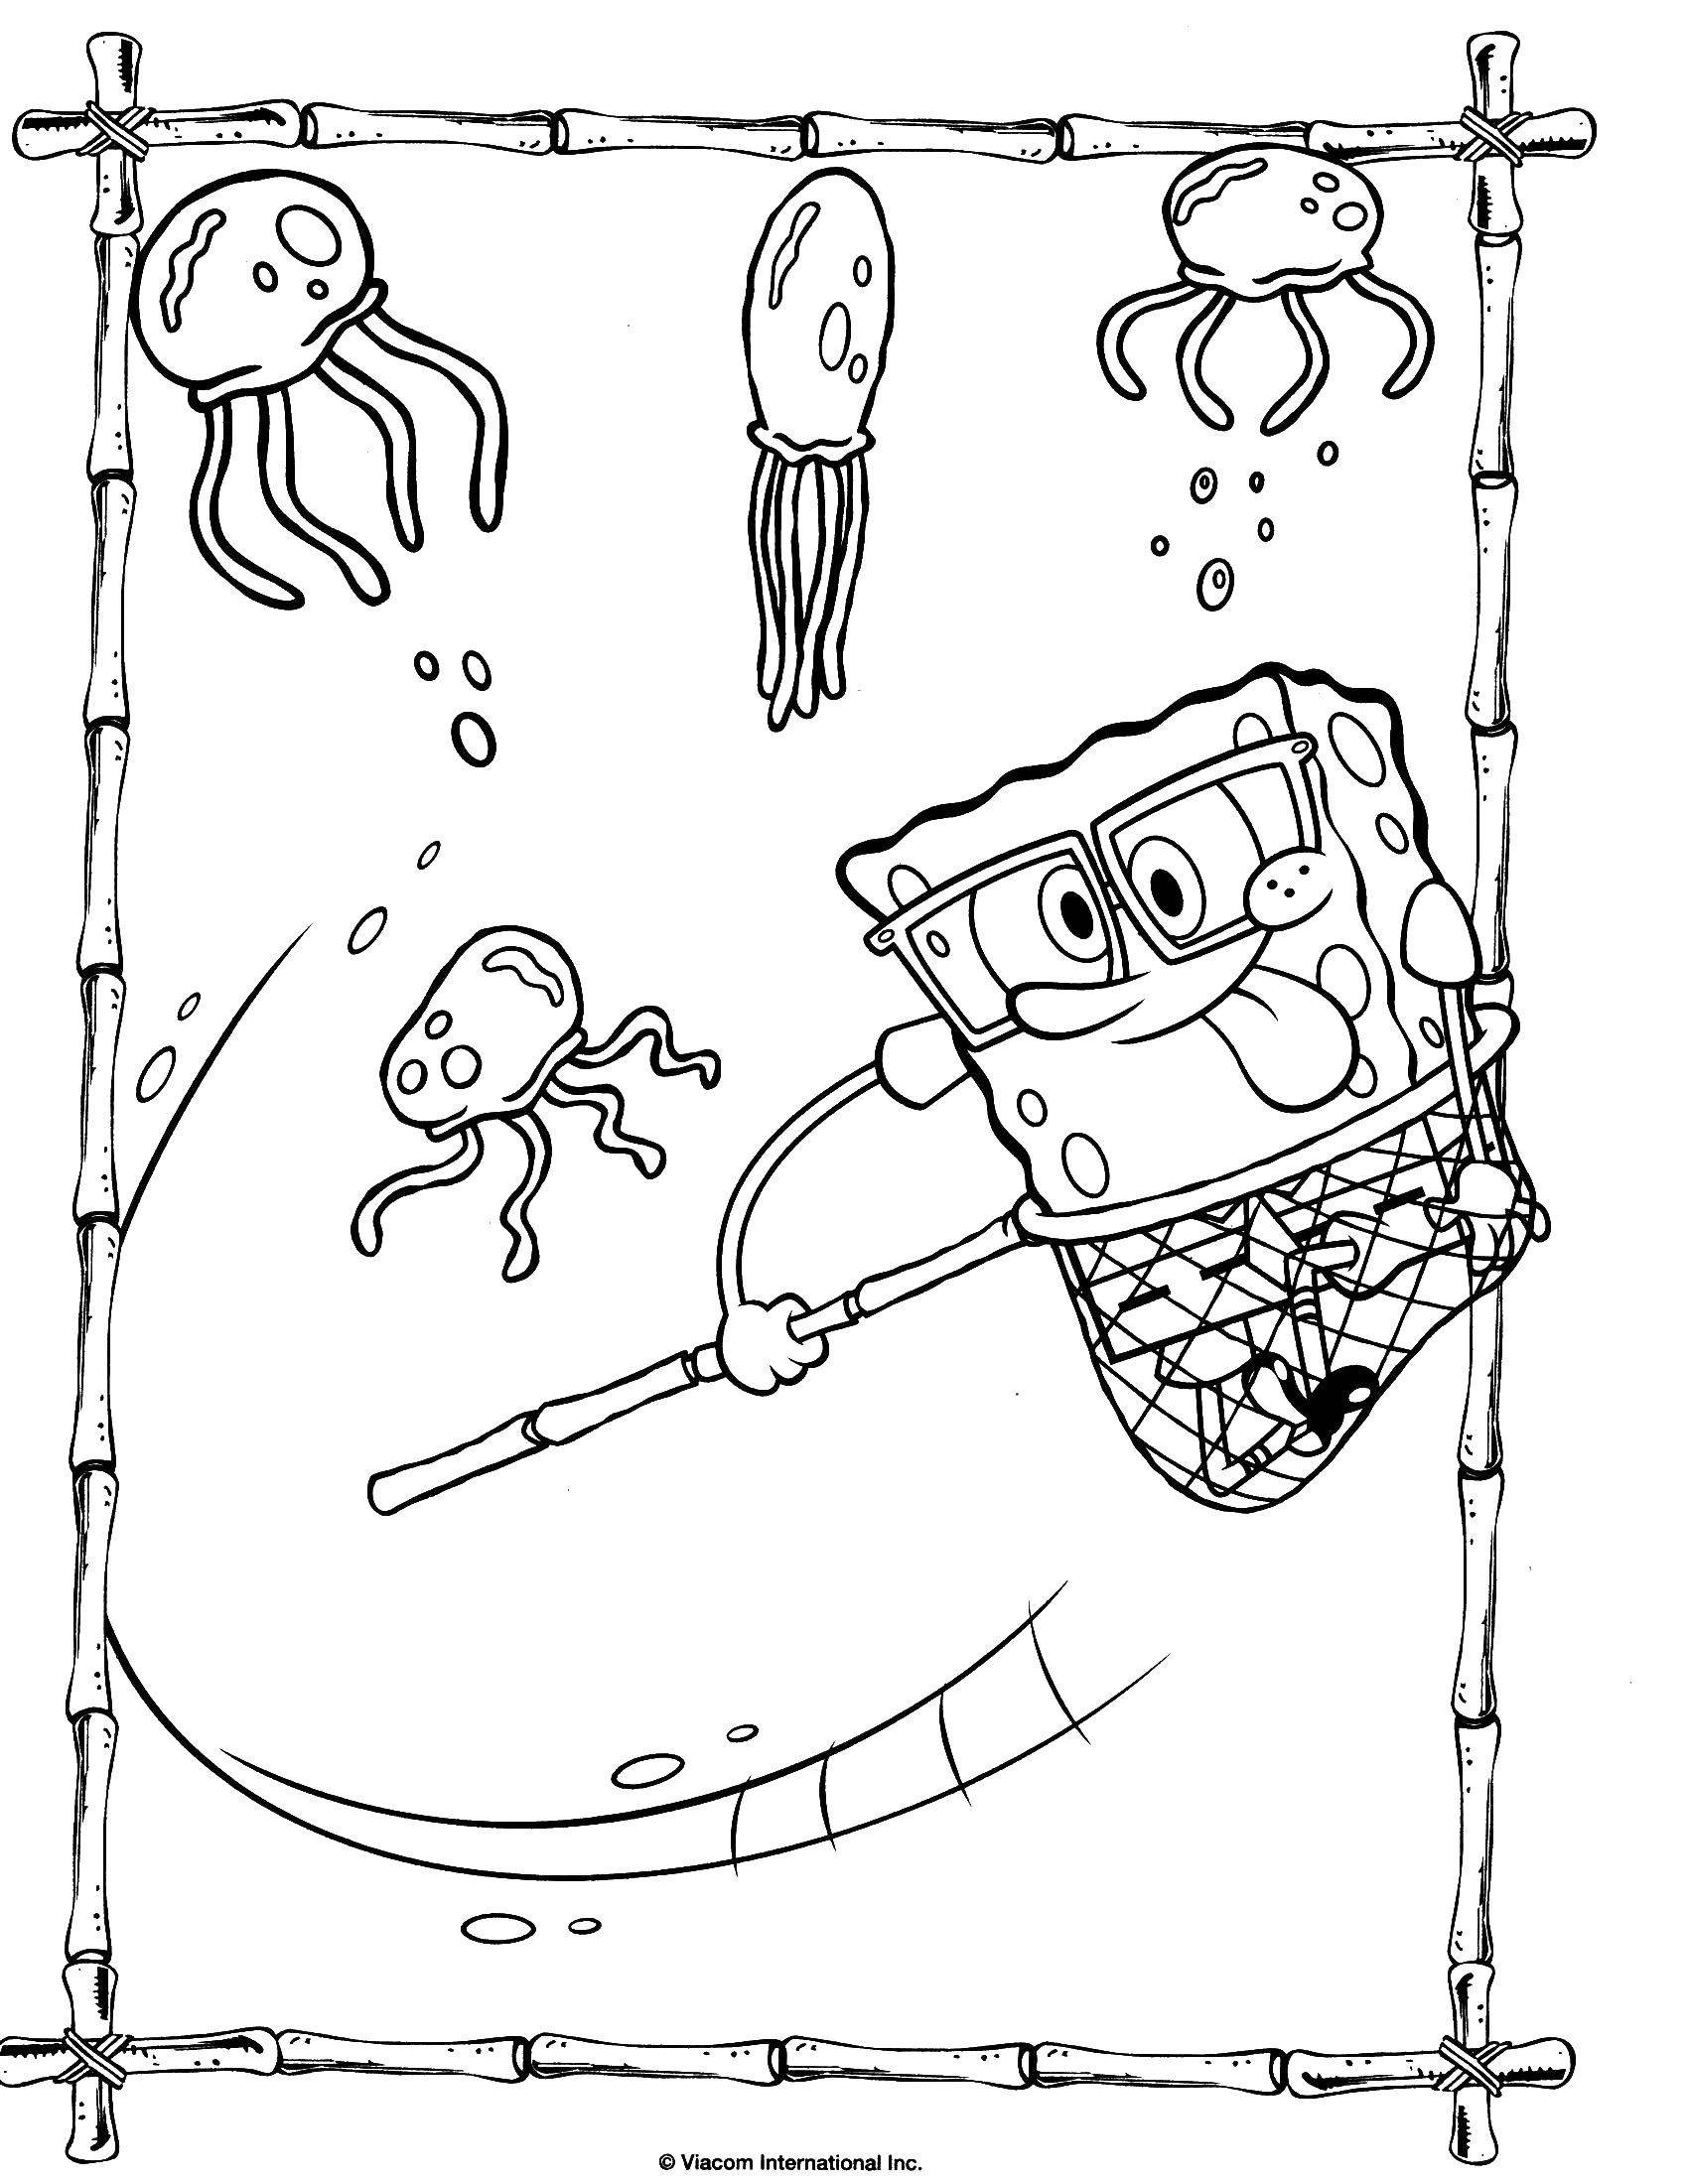 Coloring Spongebob catches jellyfish. Category Spongebob. Tags:  spongebob, Patrick, jellyfish.